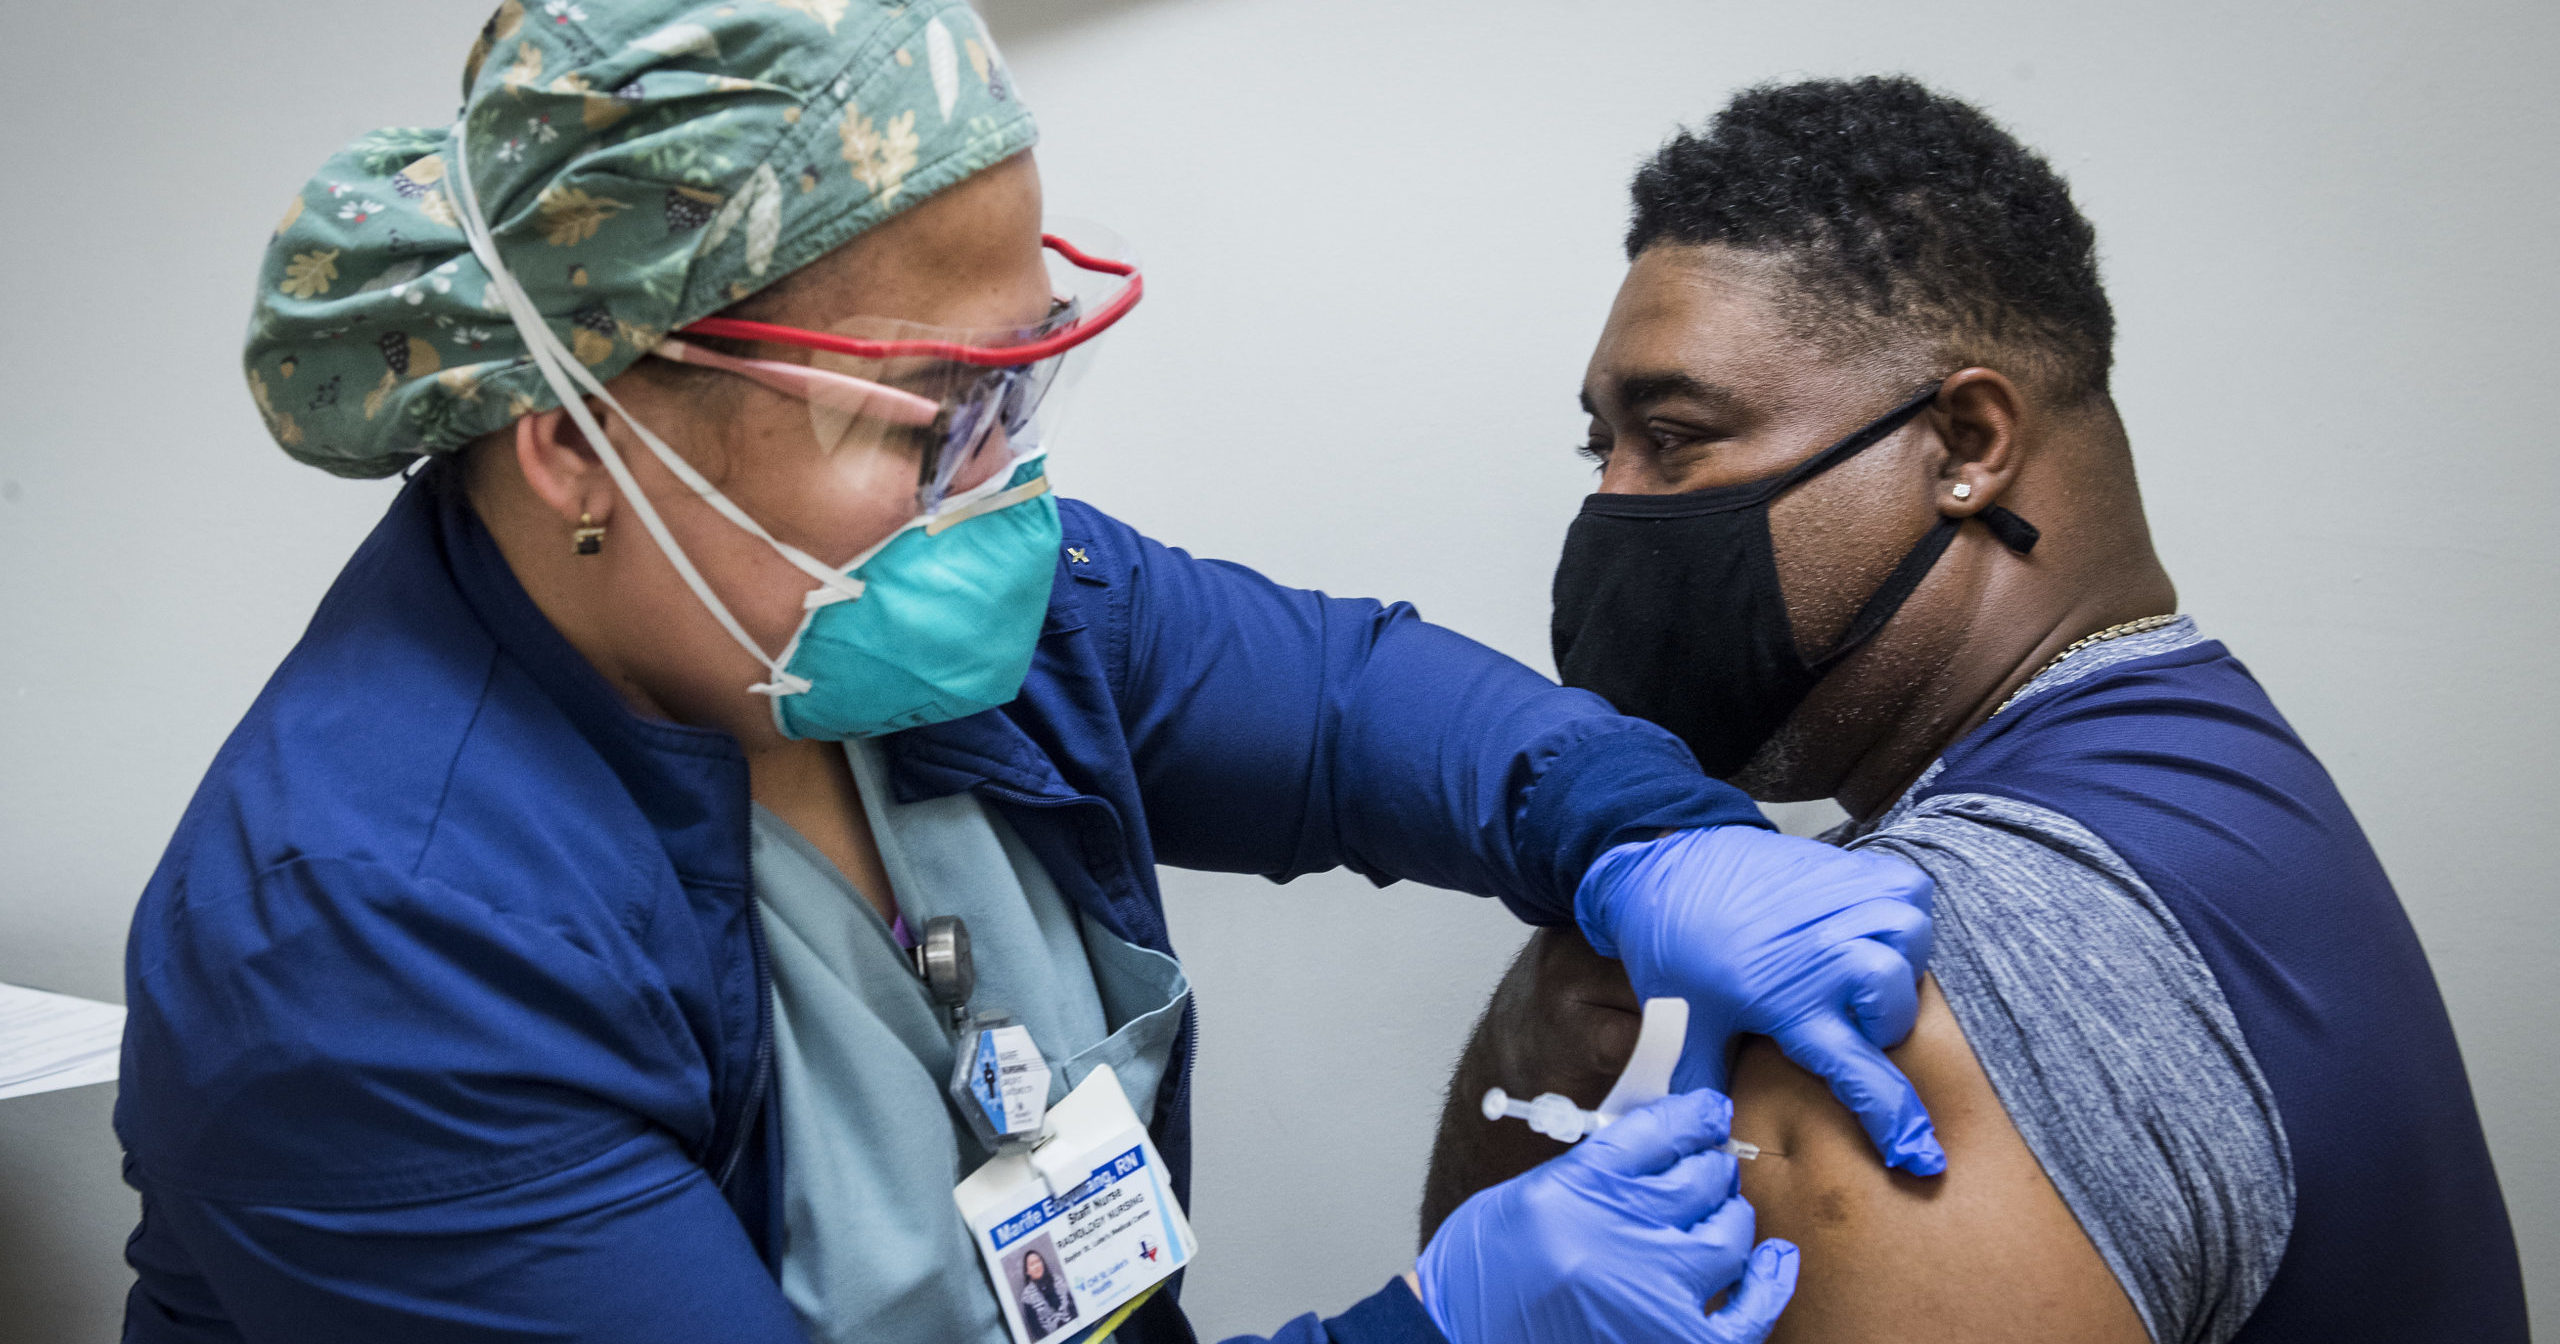 Nurse Marife Edquilang administers a dose of Pfizer's COVID-19 vaccine to Anthony Monroe during a vaccination drive at Texas Southern University in Houston on Feb. 11, 2021.